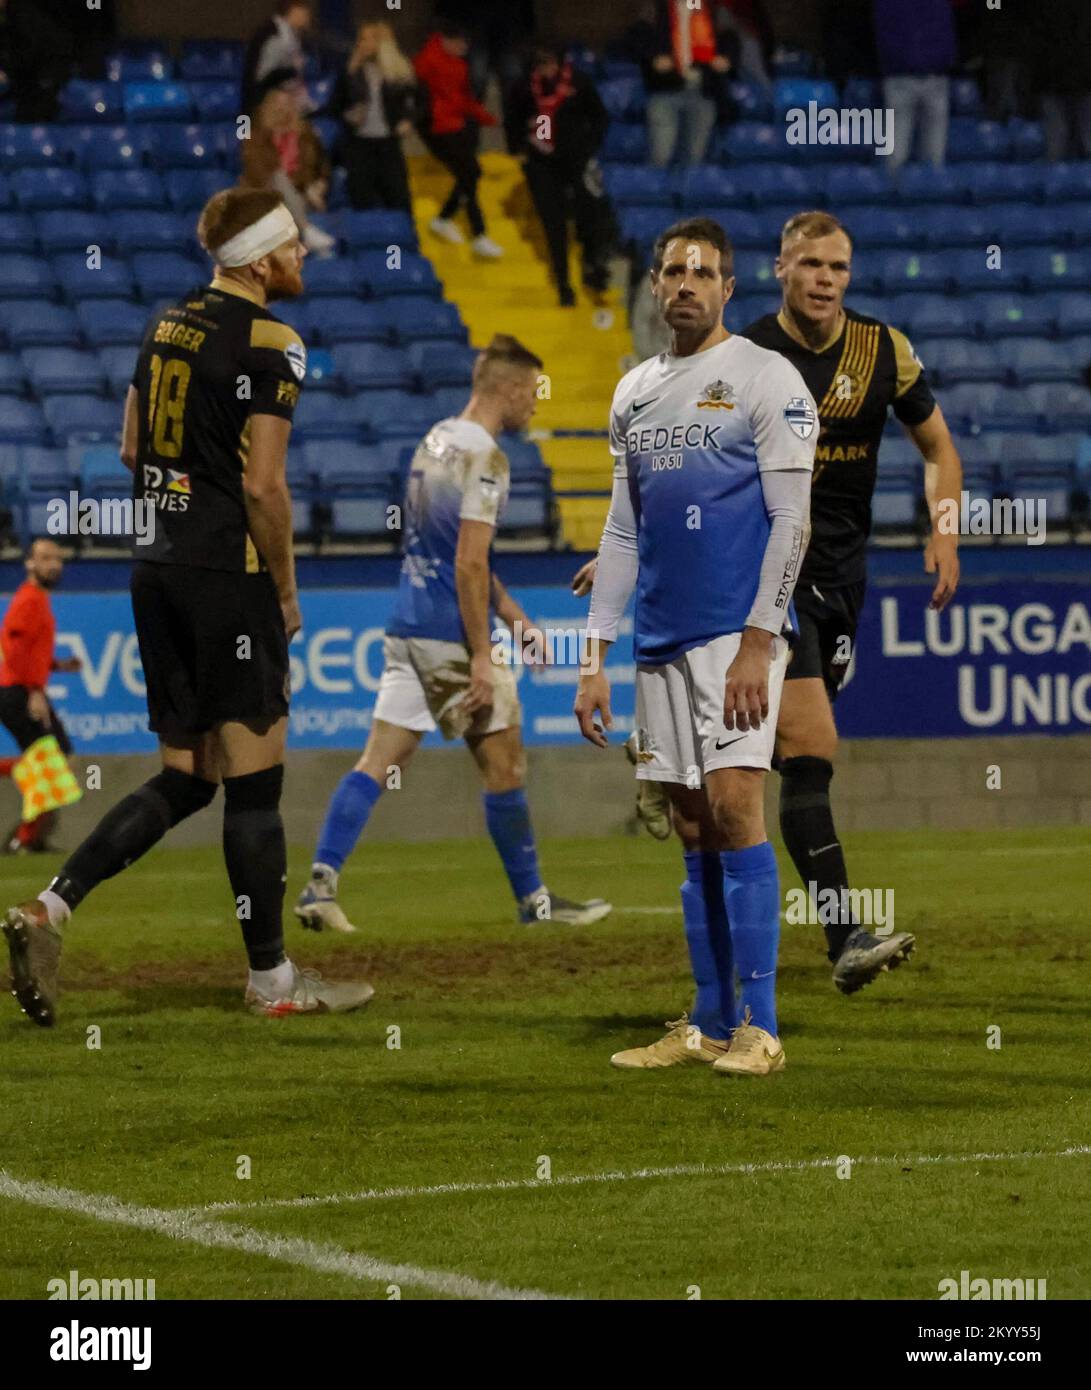 Mourneview Park, Lurgan, County Armagh, Northern Ireland, UK. 2 Dec 2022. Danske Bank Premiership – Glenavon v Larne Action from tonight's game at Mourneview Park (Glenavon in blue). An own goal from Gleavon's Sean Ward (right) was the difference between the teams. Credit: CAZIMB/Alamy Live News. Stock Photo